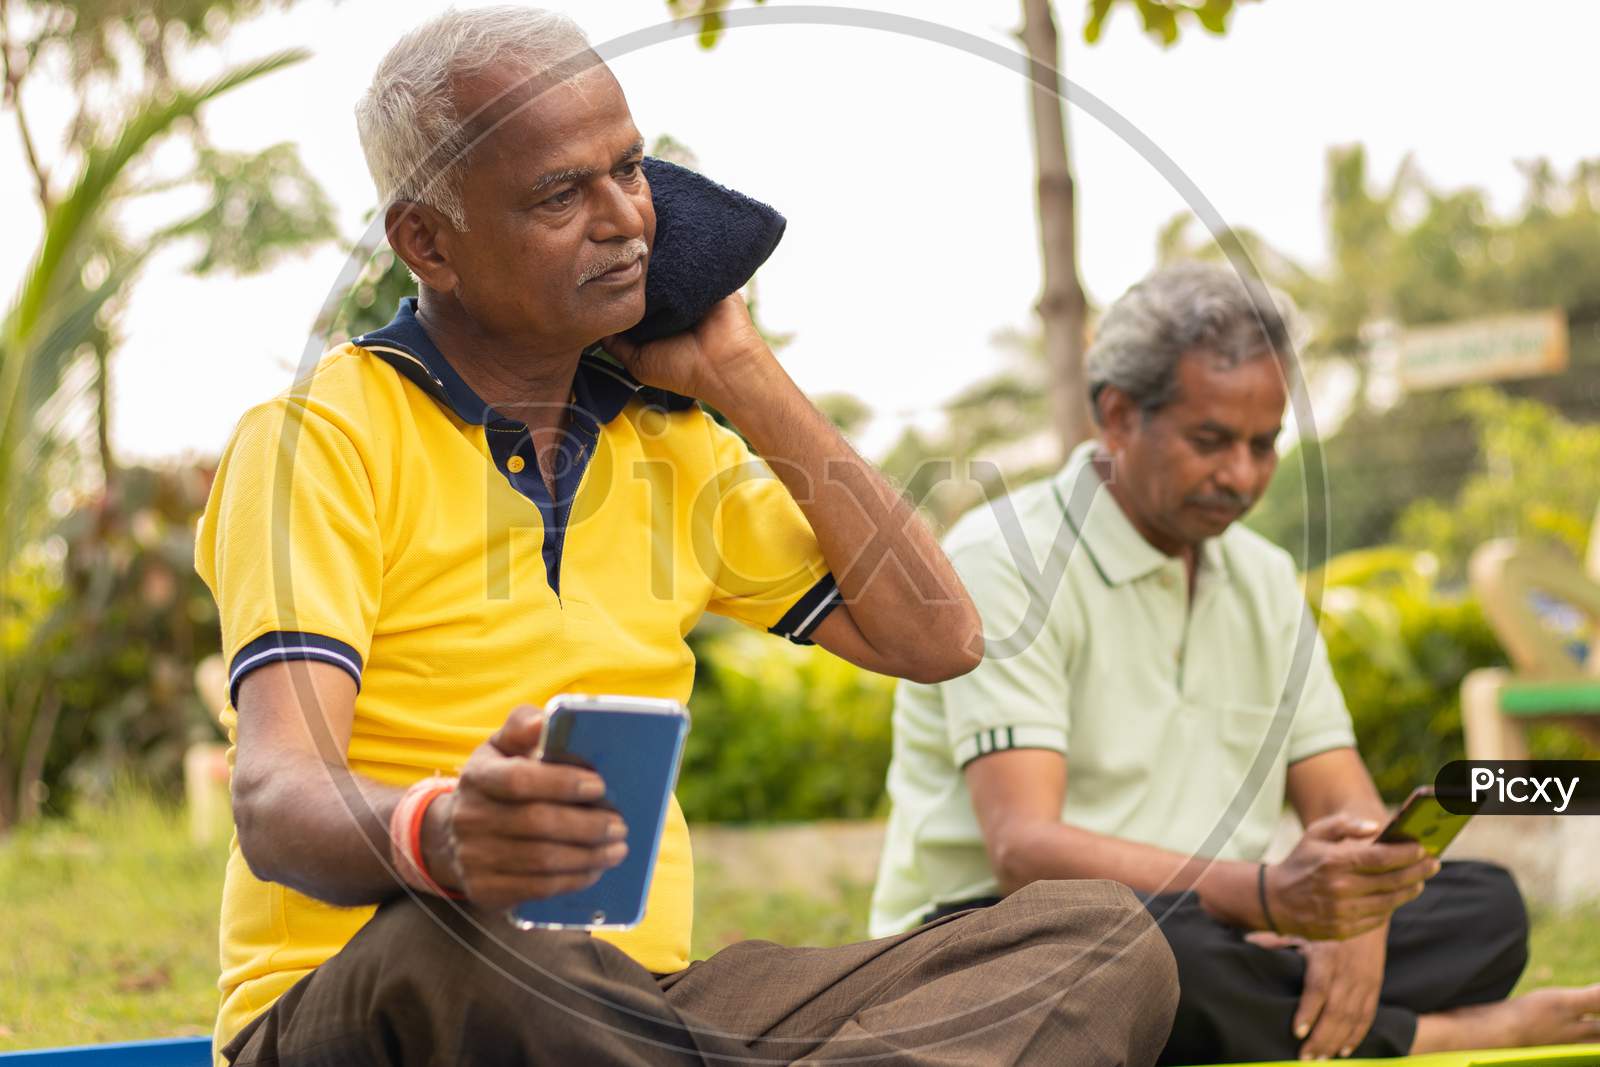 A couple of Elderly or Old Men's using Smartphone or Mobile Phone while doing Fitness Activity in a Park